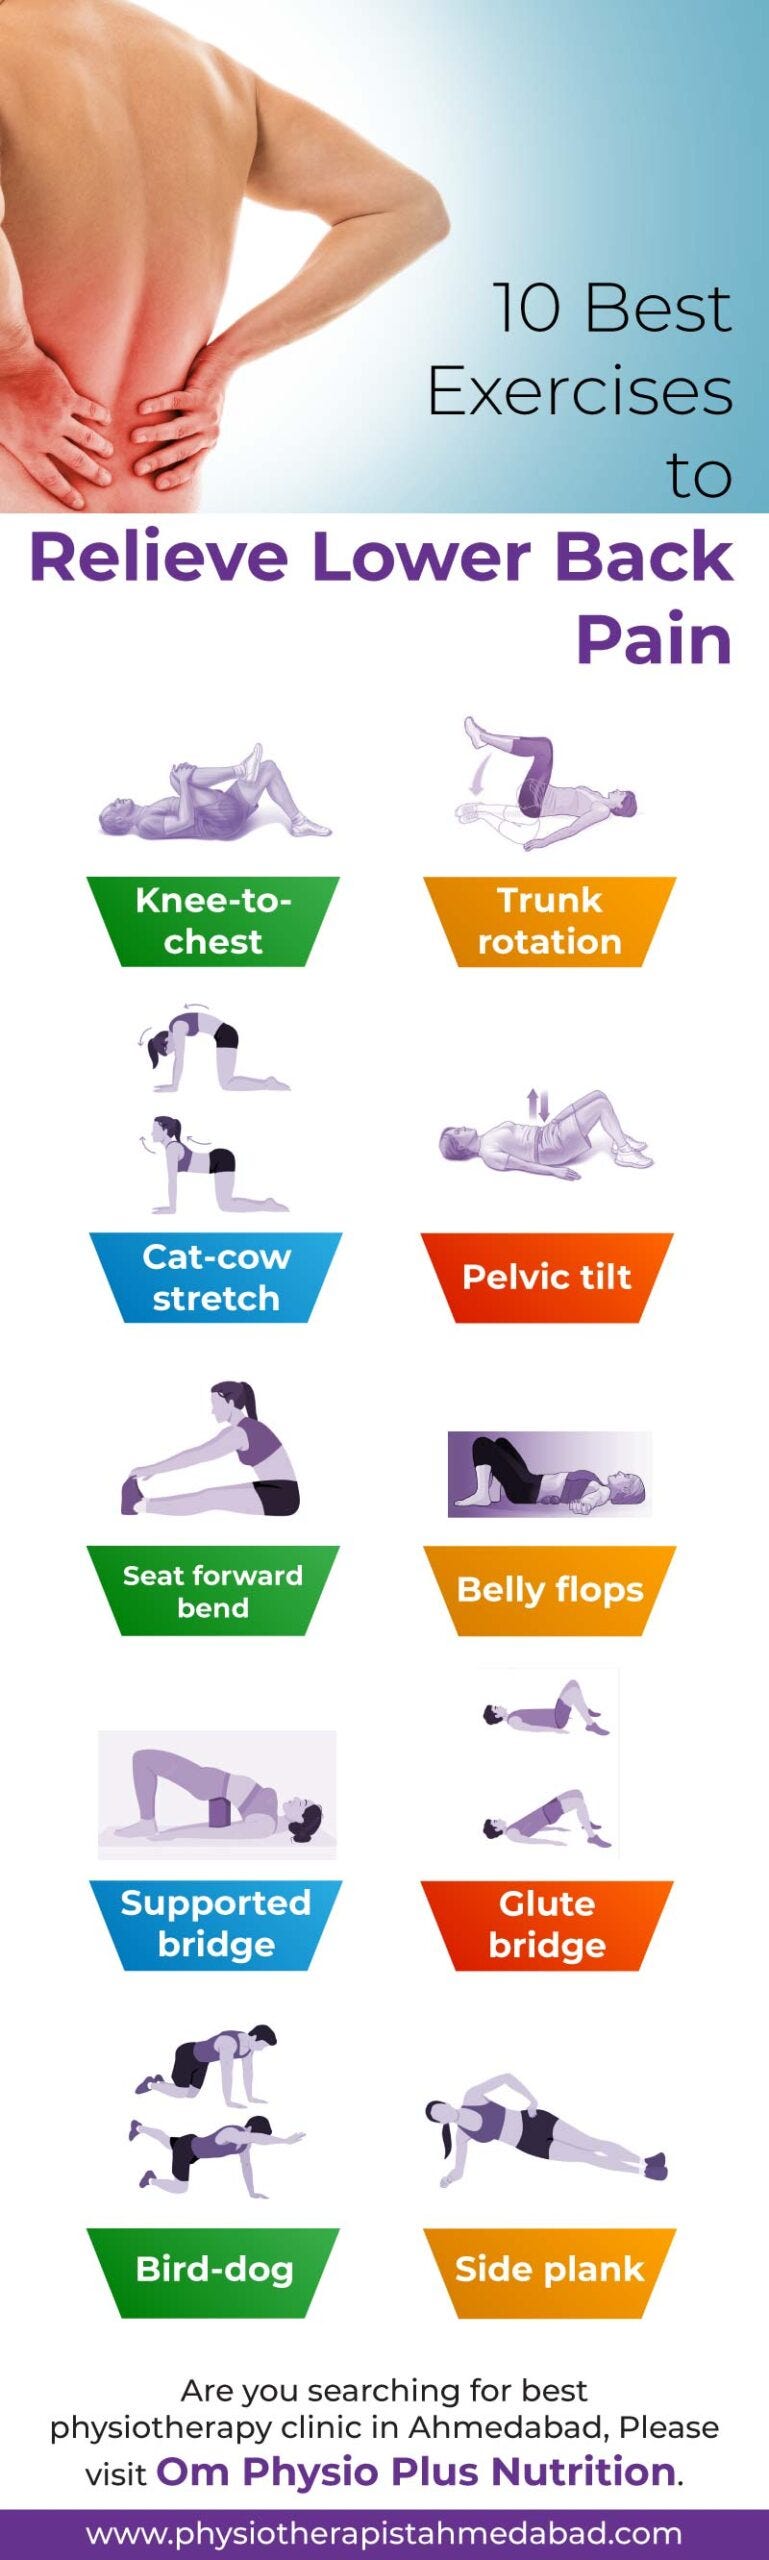 10 Best Exercises to Relieve Lower Back Pain, by Om Physio